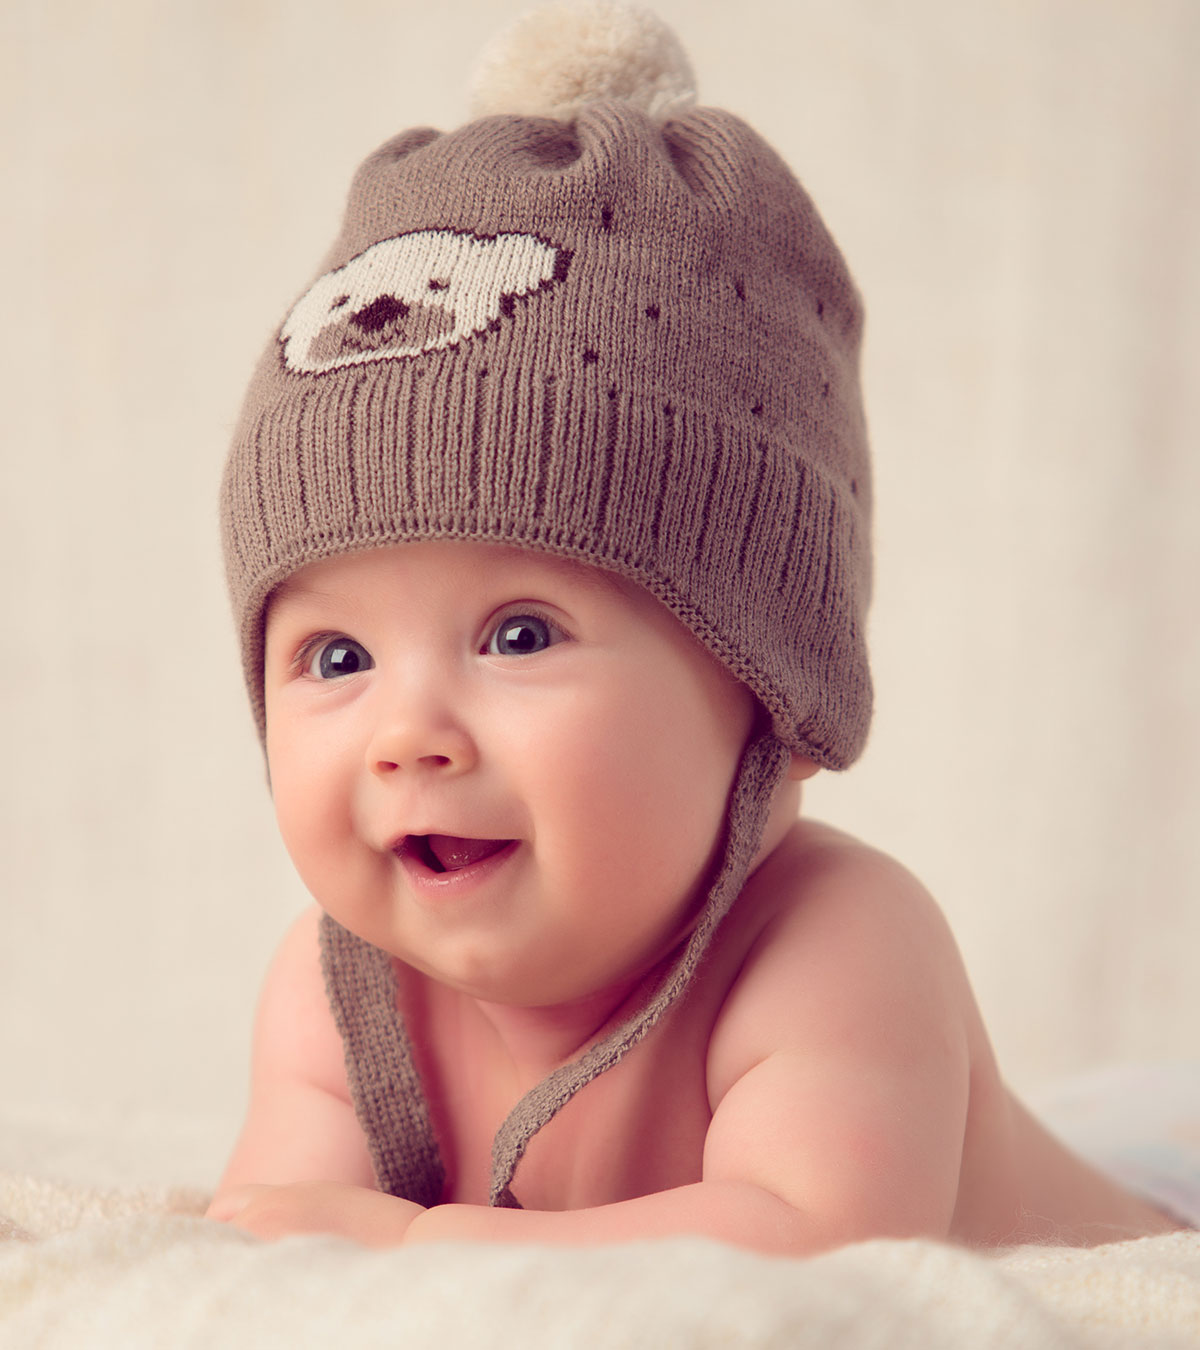 The Ultimate Collection of Cute and Stylish Baby Boy Images in Full 4K – Over 999+ Amazing Photos